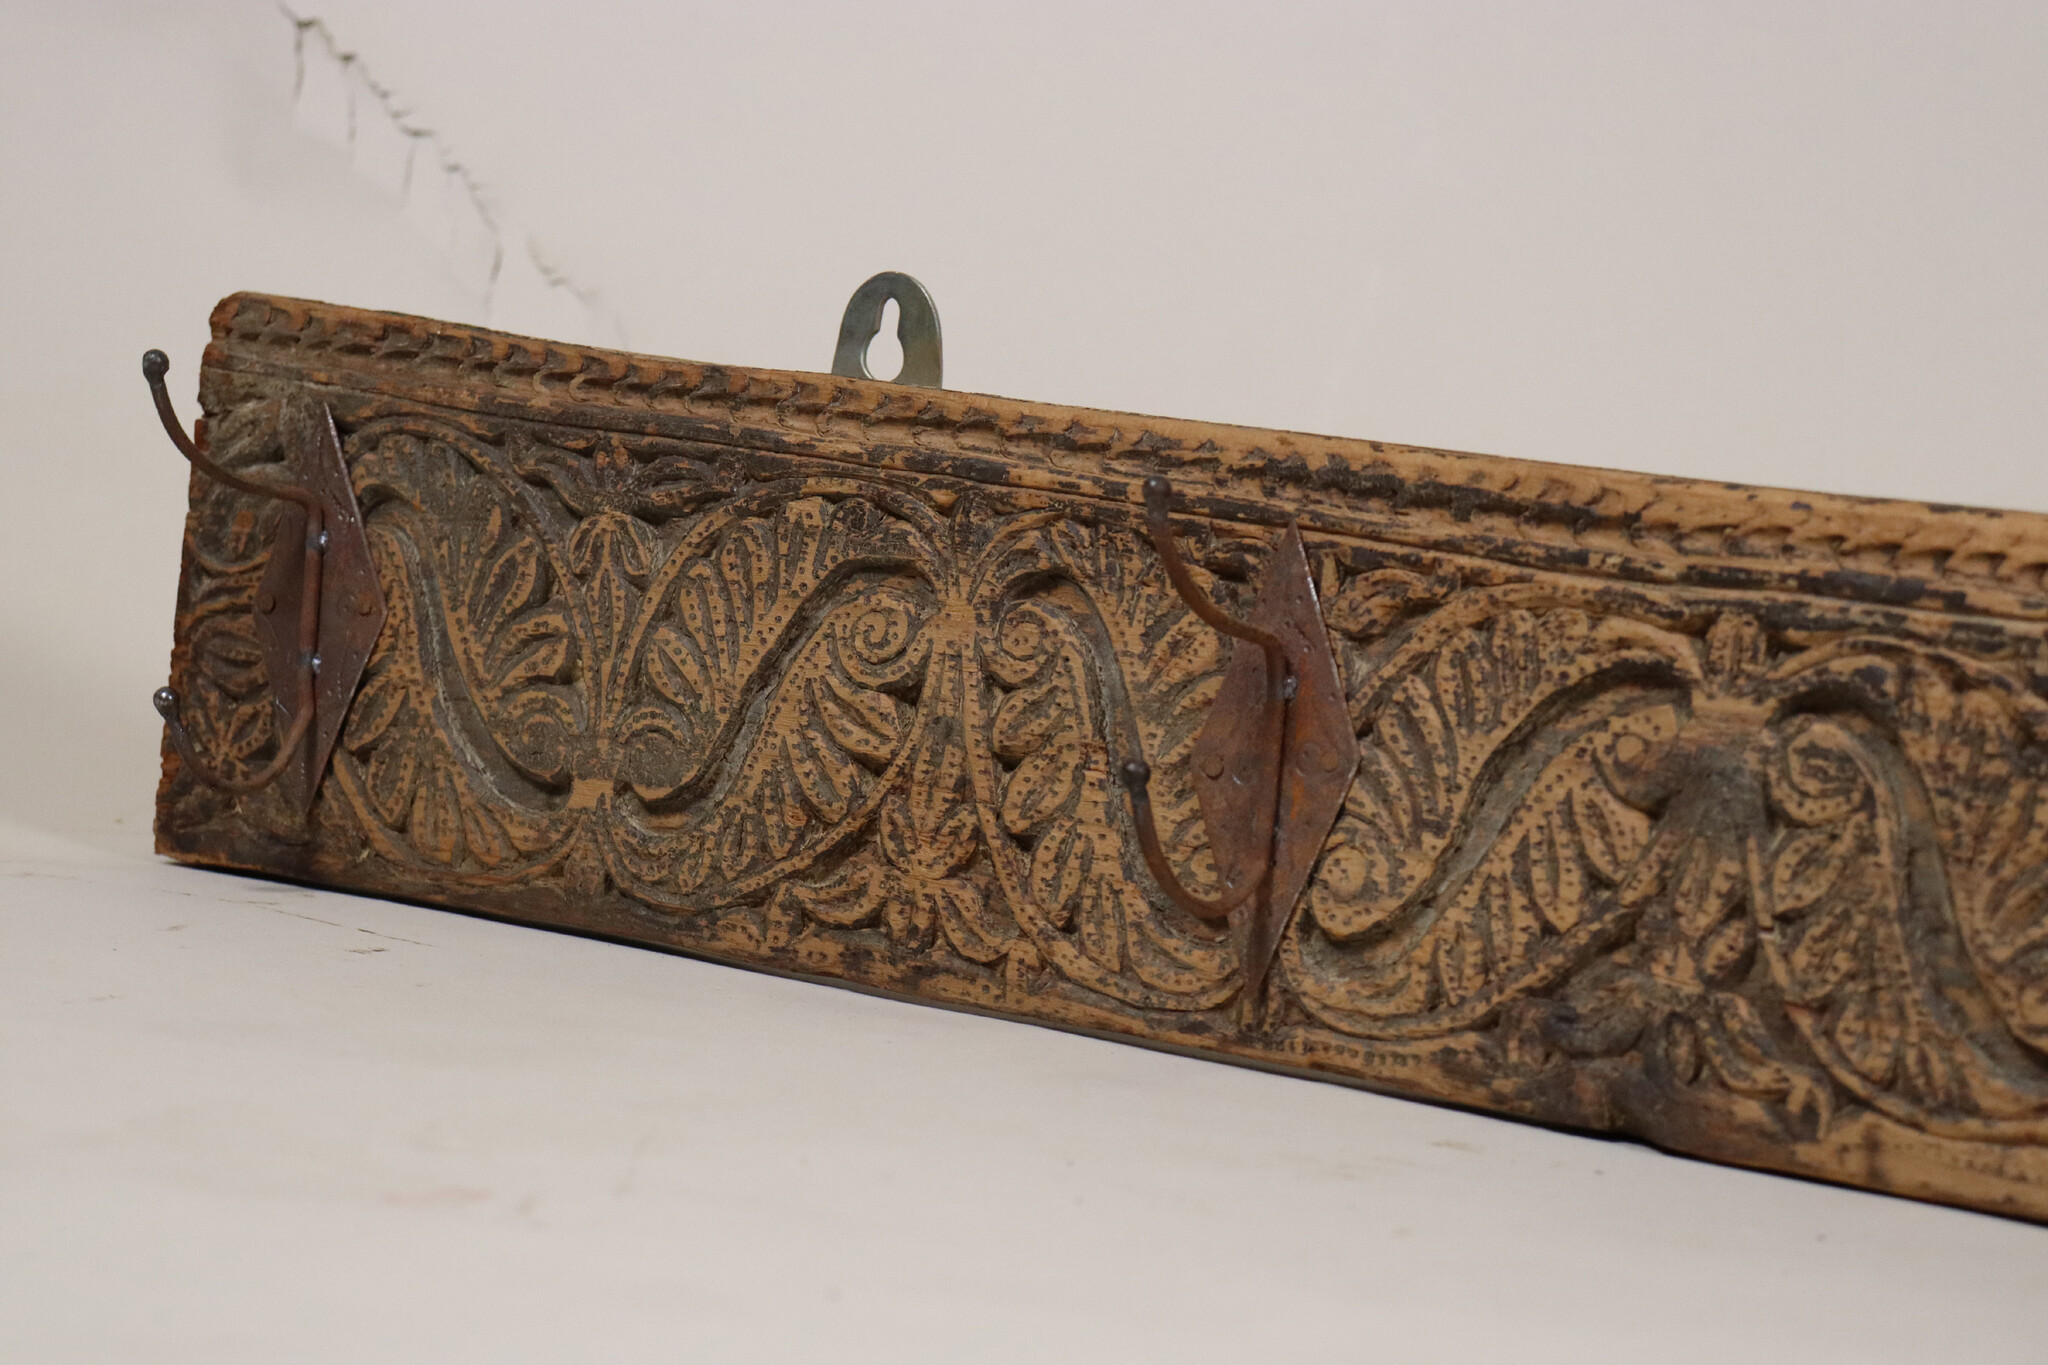 150 cm antique  Coat and hat Rack with 4 wrought iron hooks  Nuristan Afghanistan  No:3